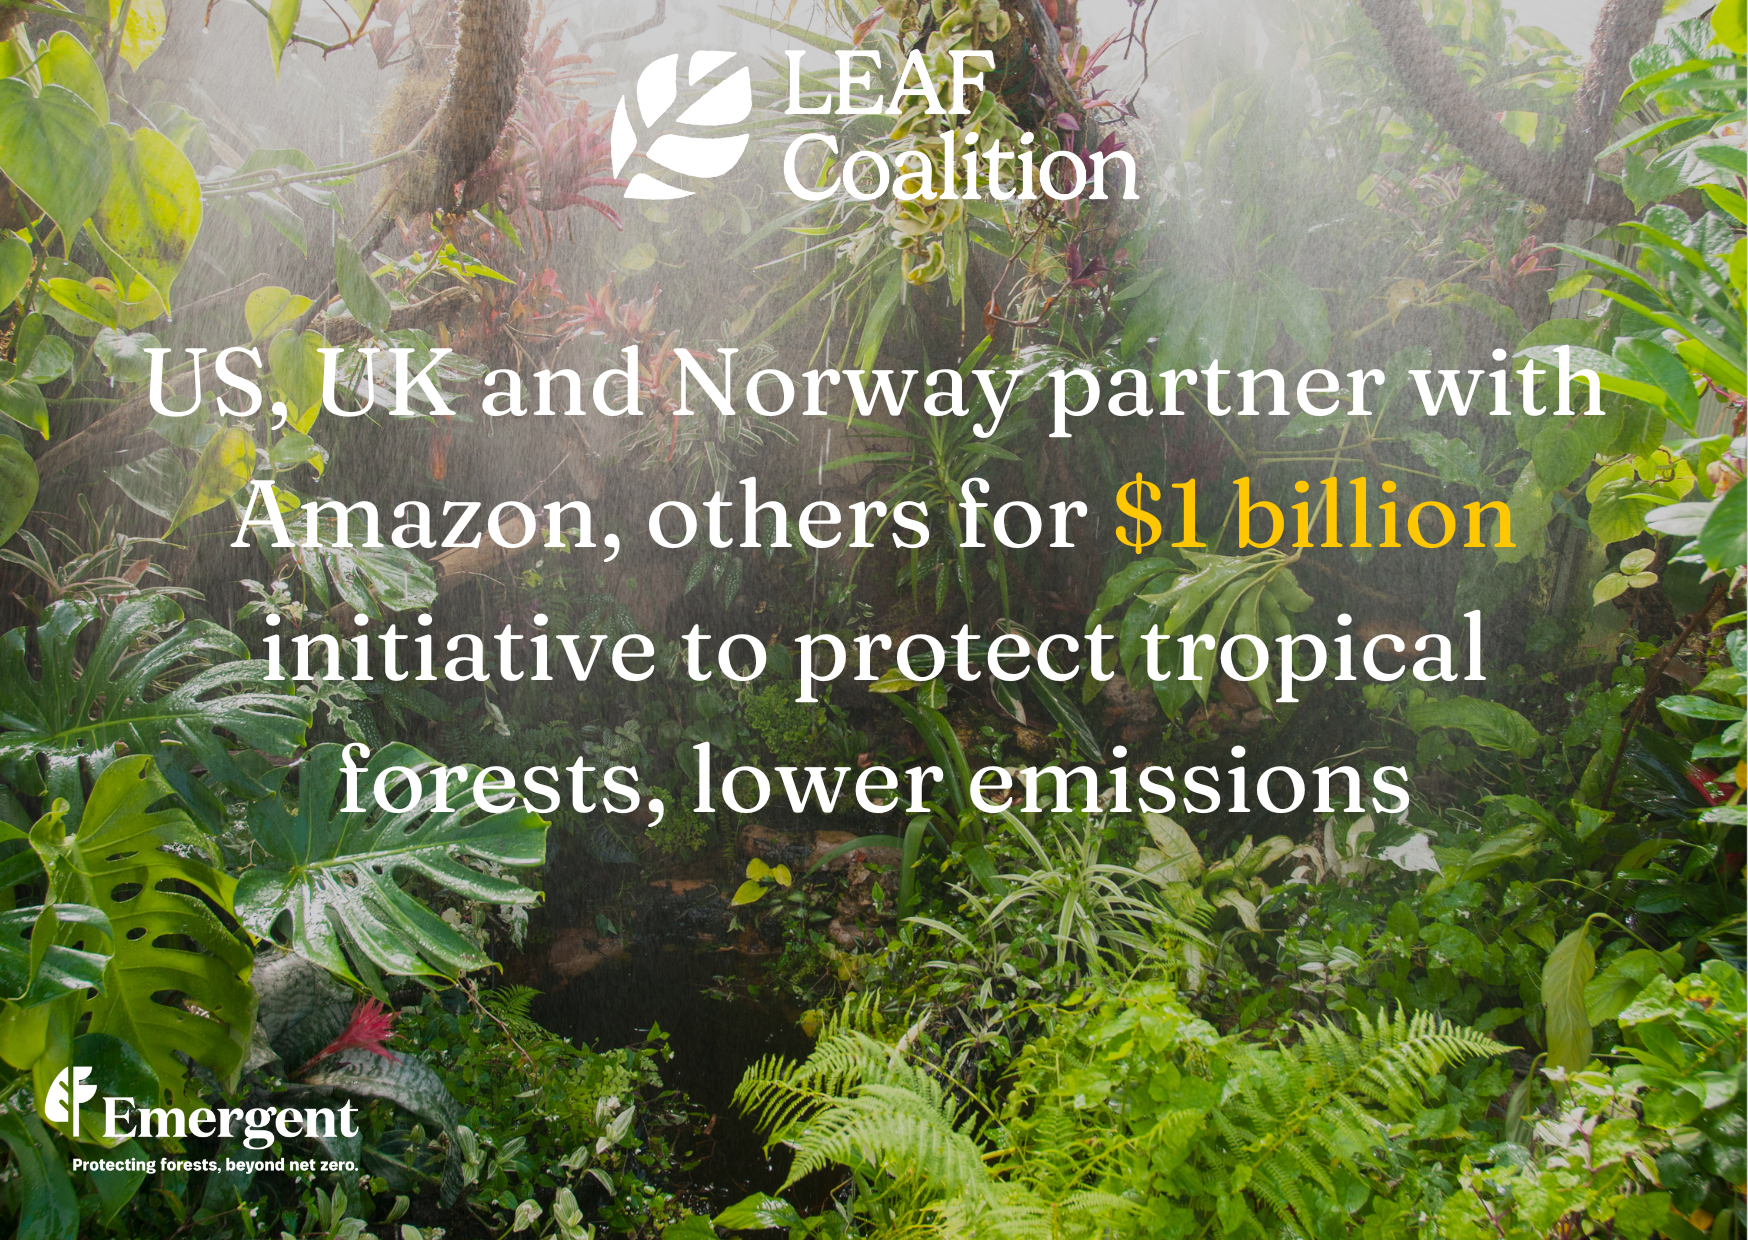 US, UK and Norway partner with Amazon, others for $1 billion initiative to protect tropical forests, lower emissions